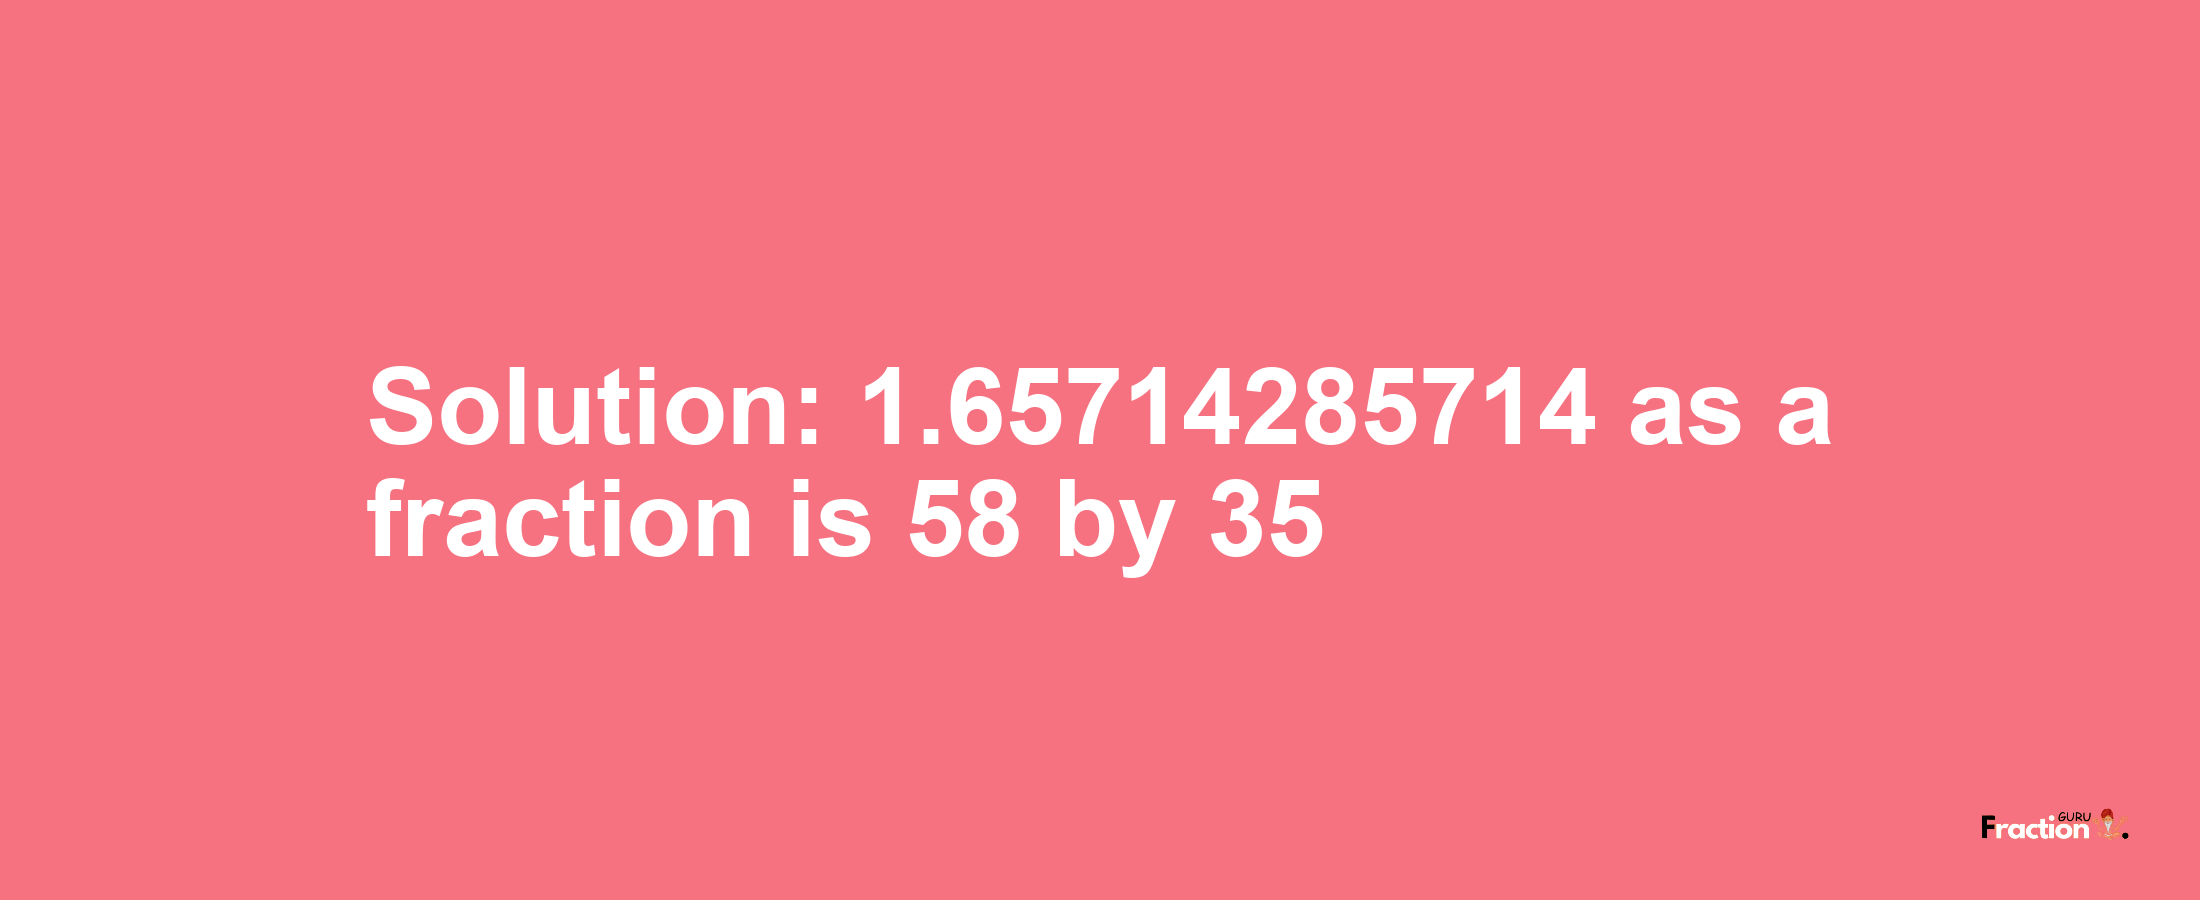 Solution:1.65714285714 as a fraction is 58/35